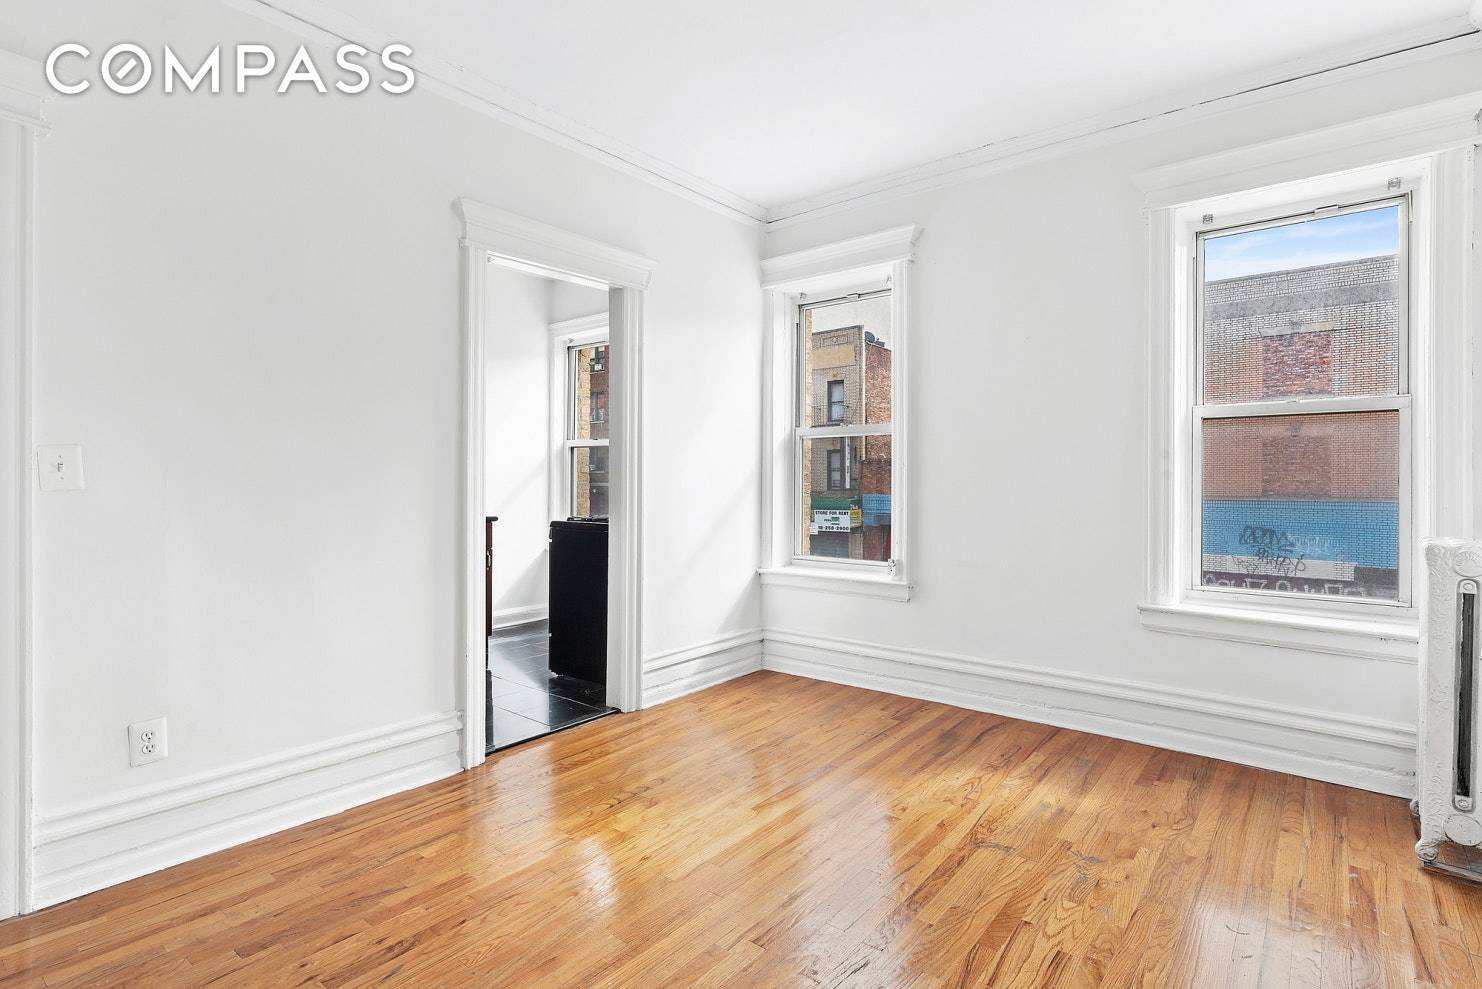 A pristine finish this newly renovated ONE bedroom is being offered at an amazing value.